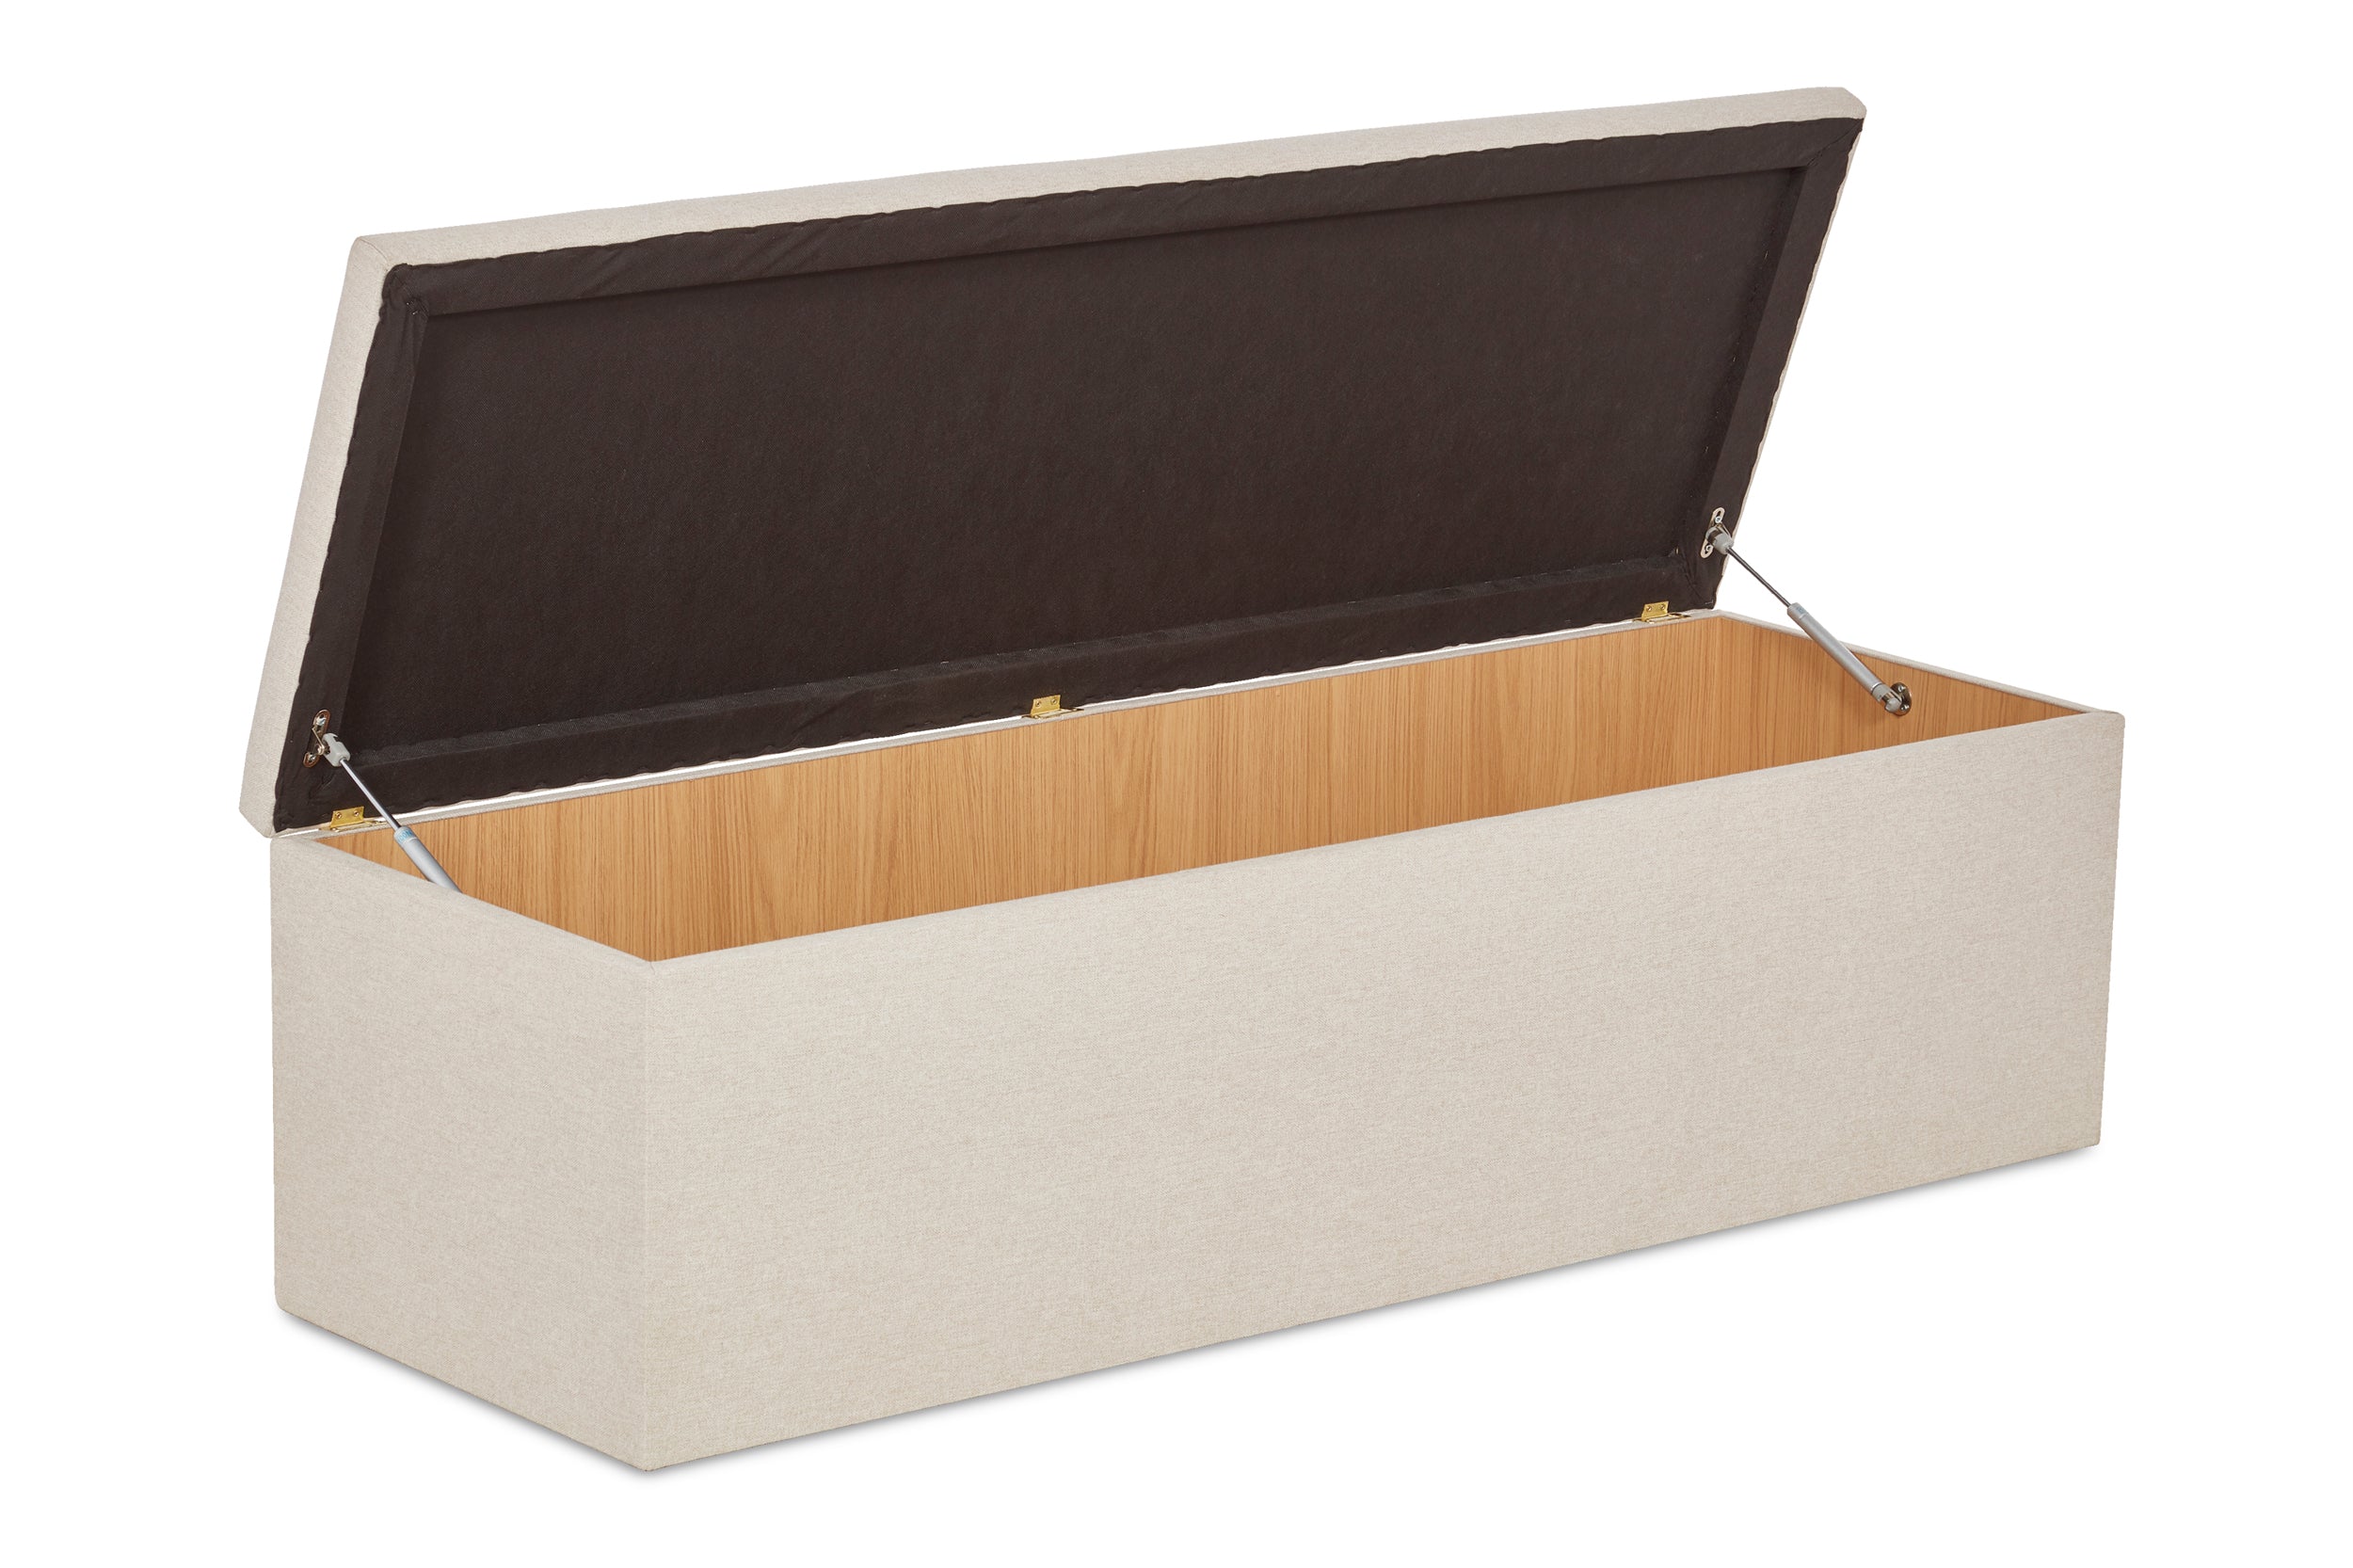 Alex Simply Upholstered Ottoman Blanket Box